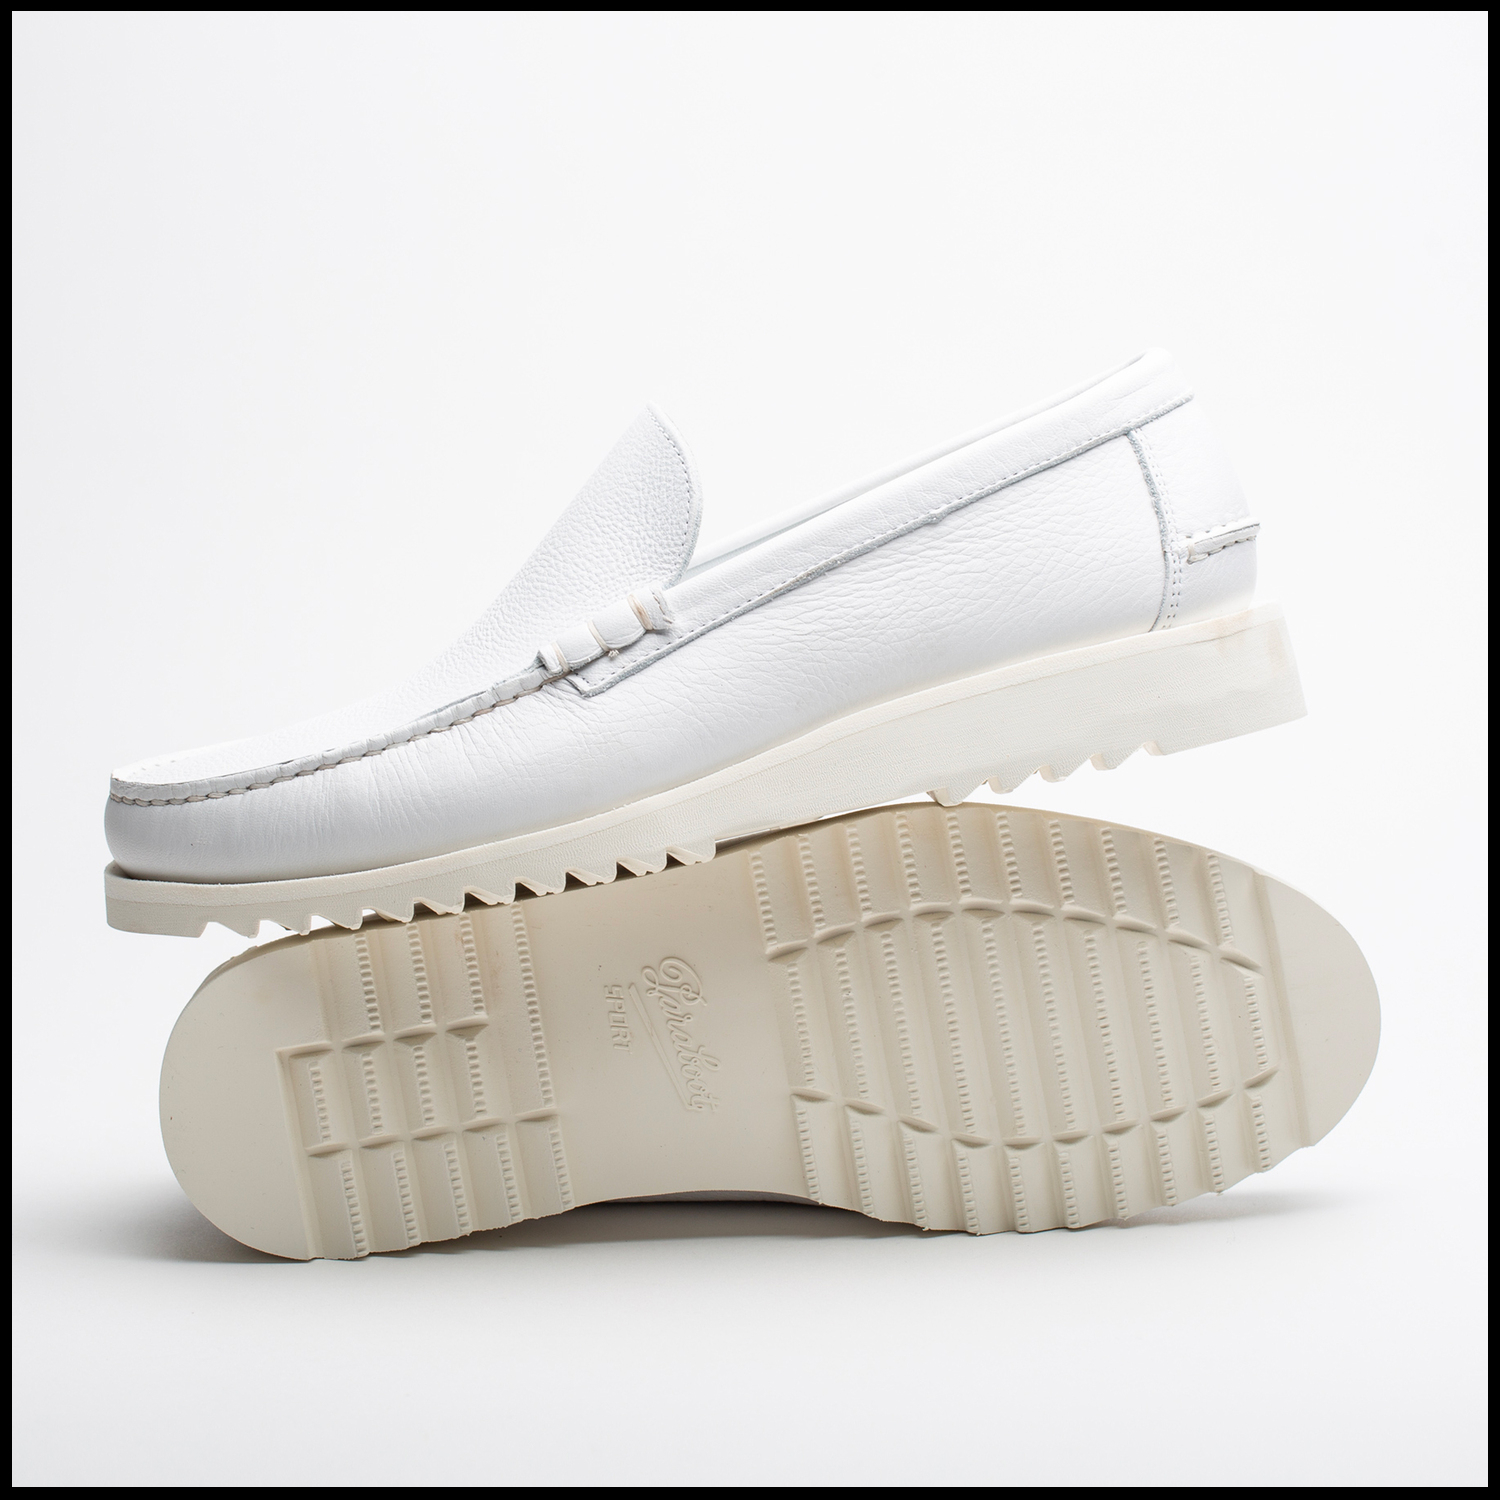 CLUB MOC in White color by Arpenteur